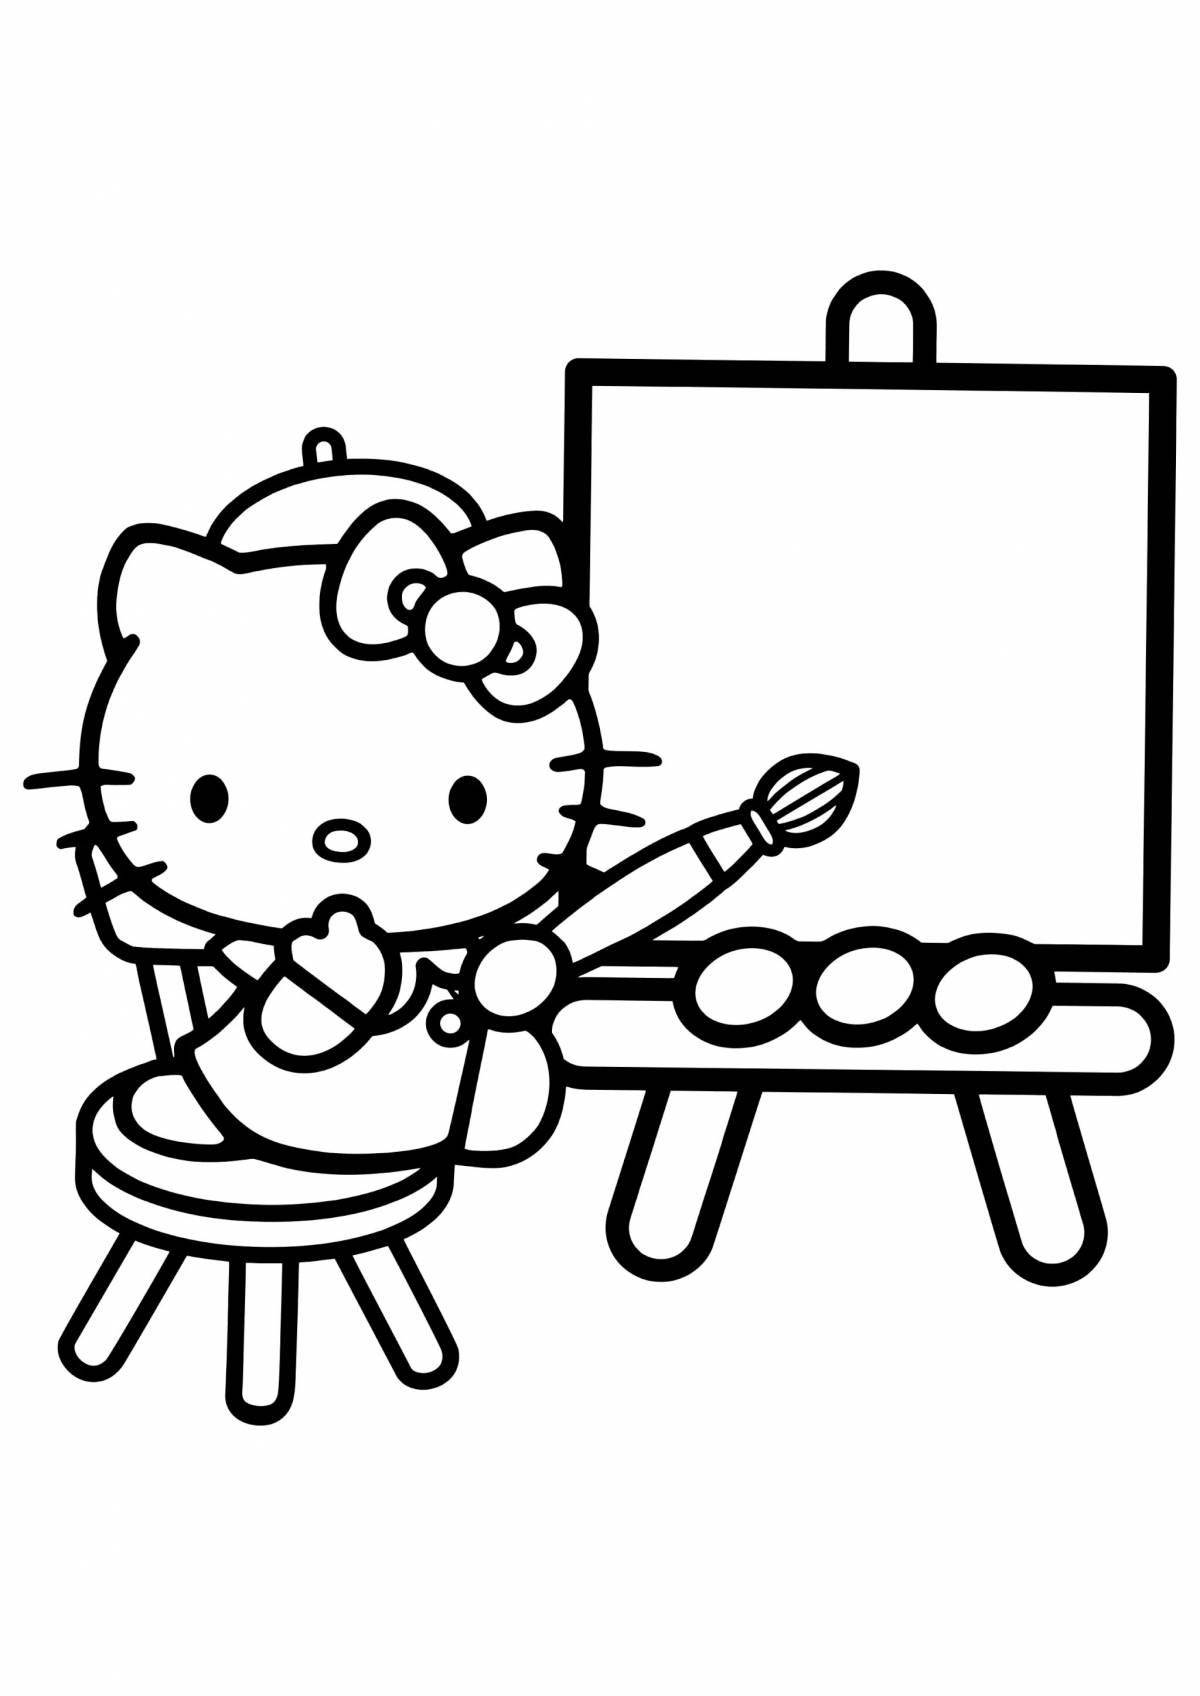 Coloring game hello kitty